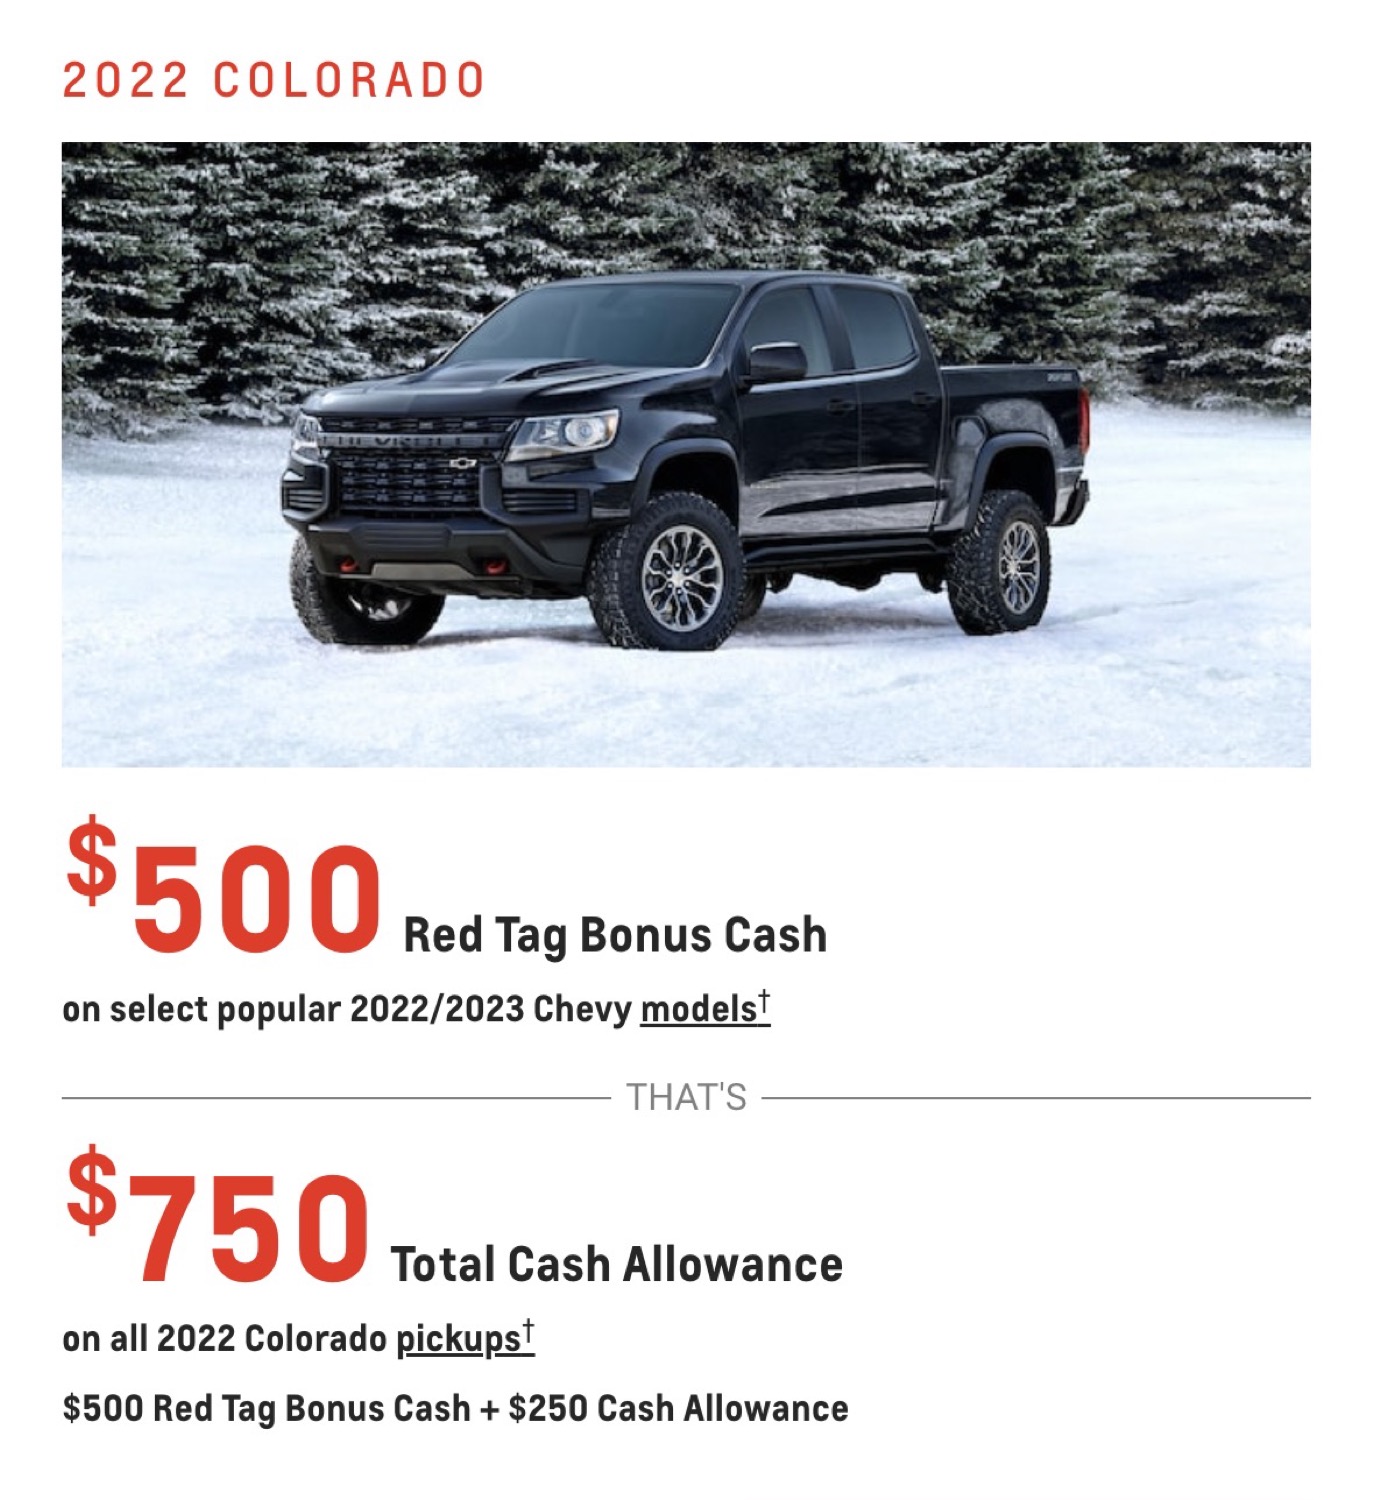 Chevy Colorado Discount Offers 750 Off In December 2022